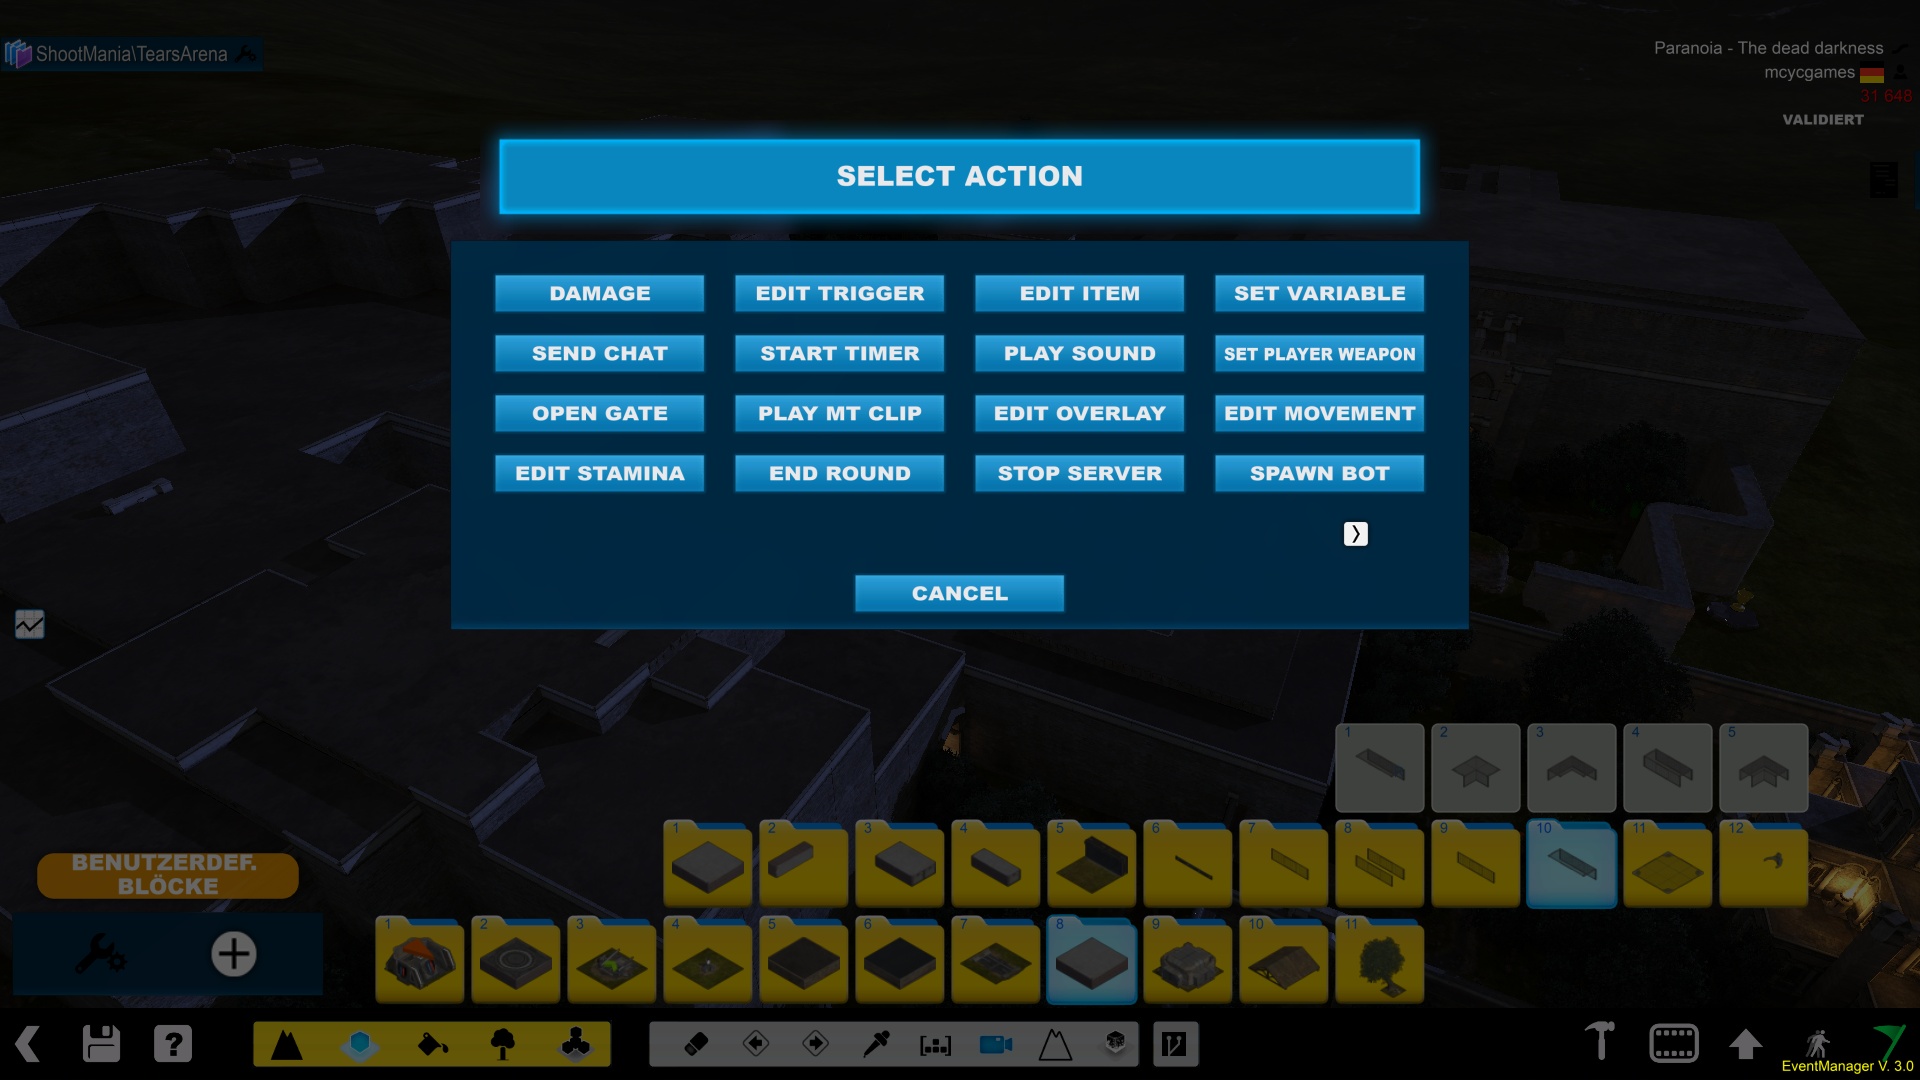 The available action types.